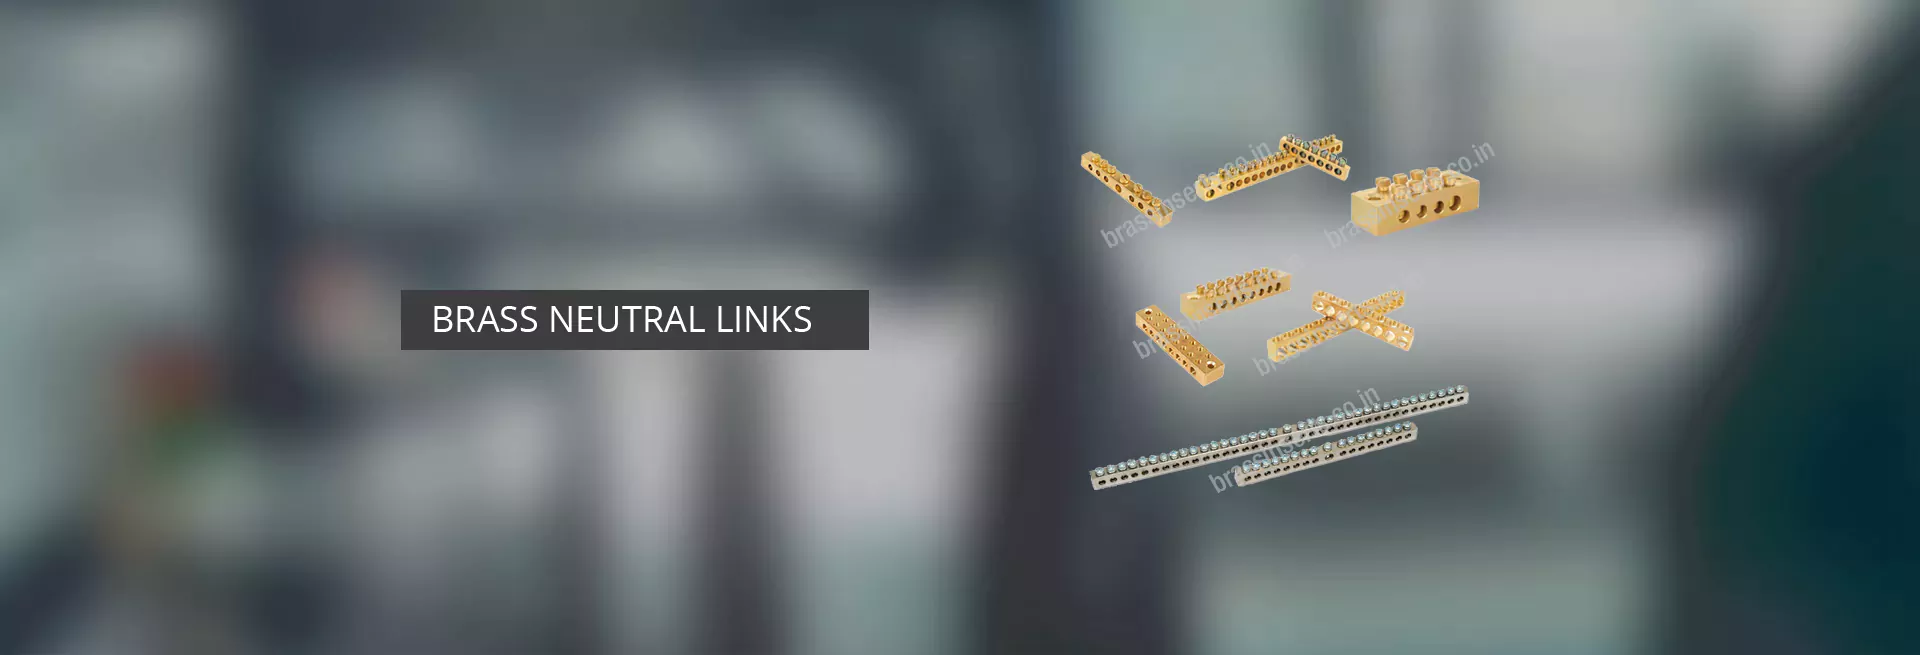 Brass Neutral Links India